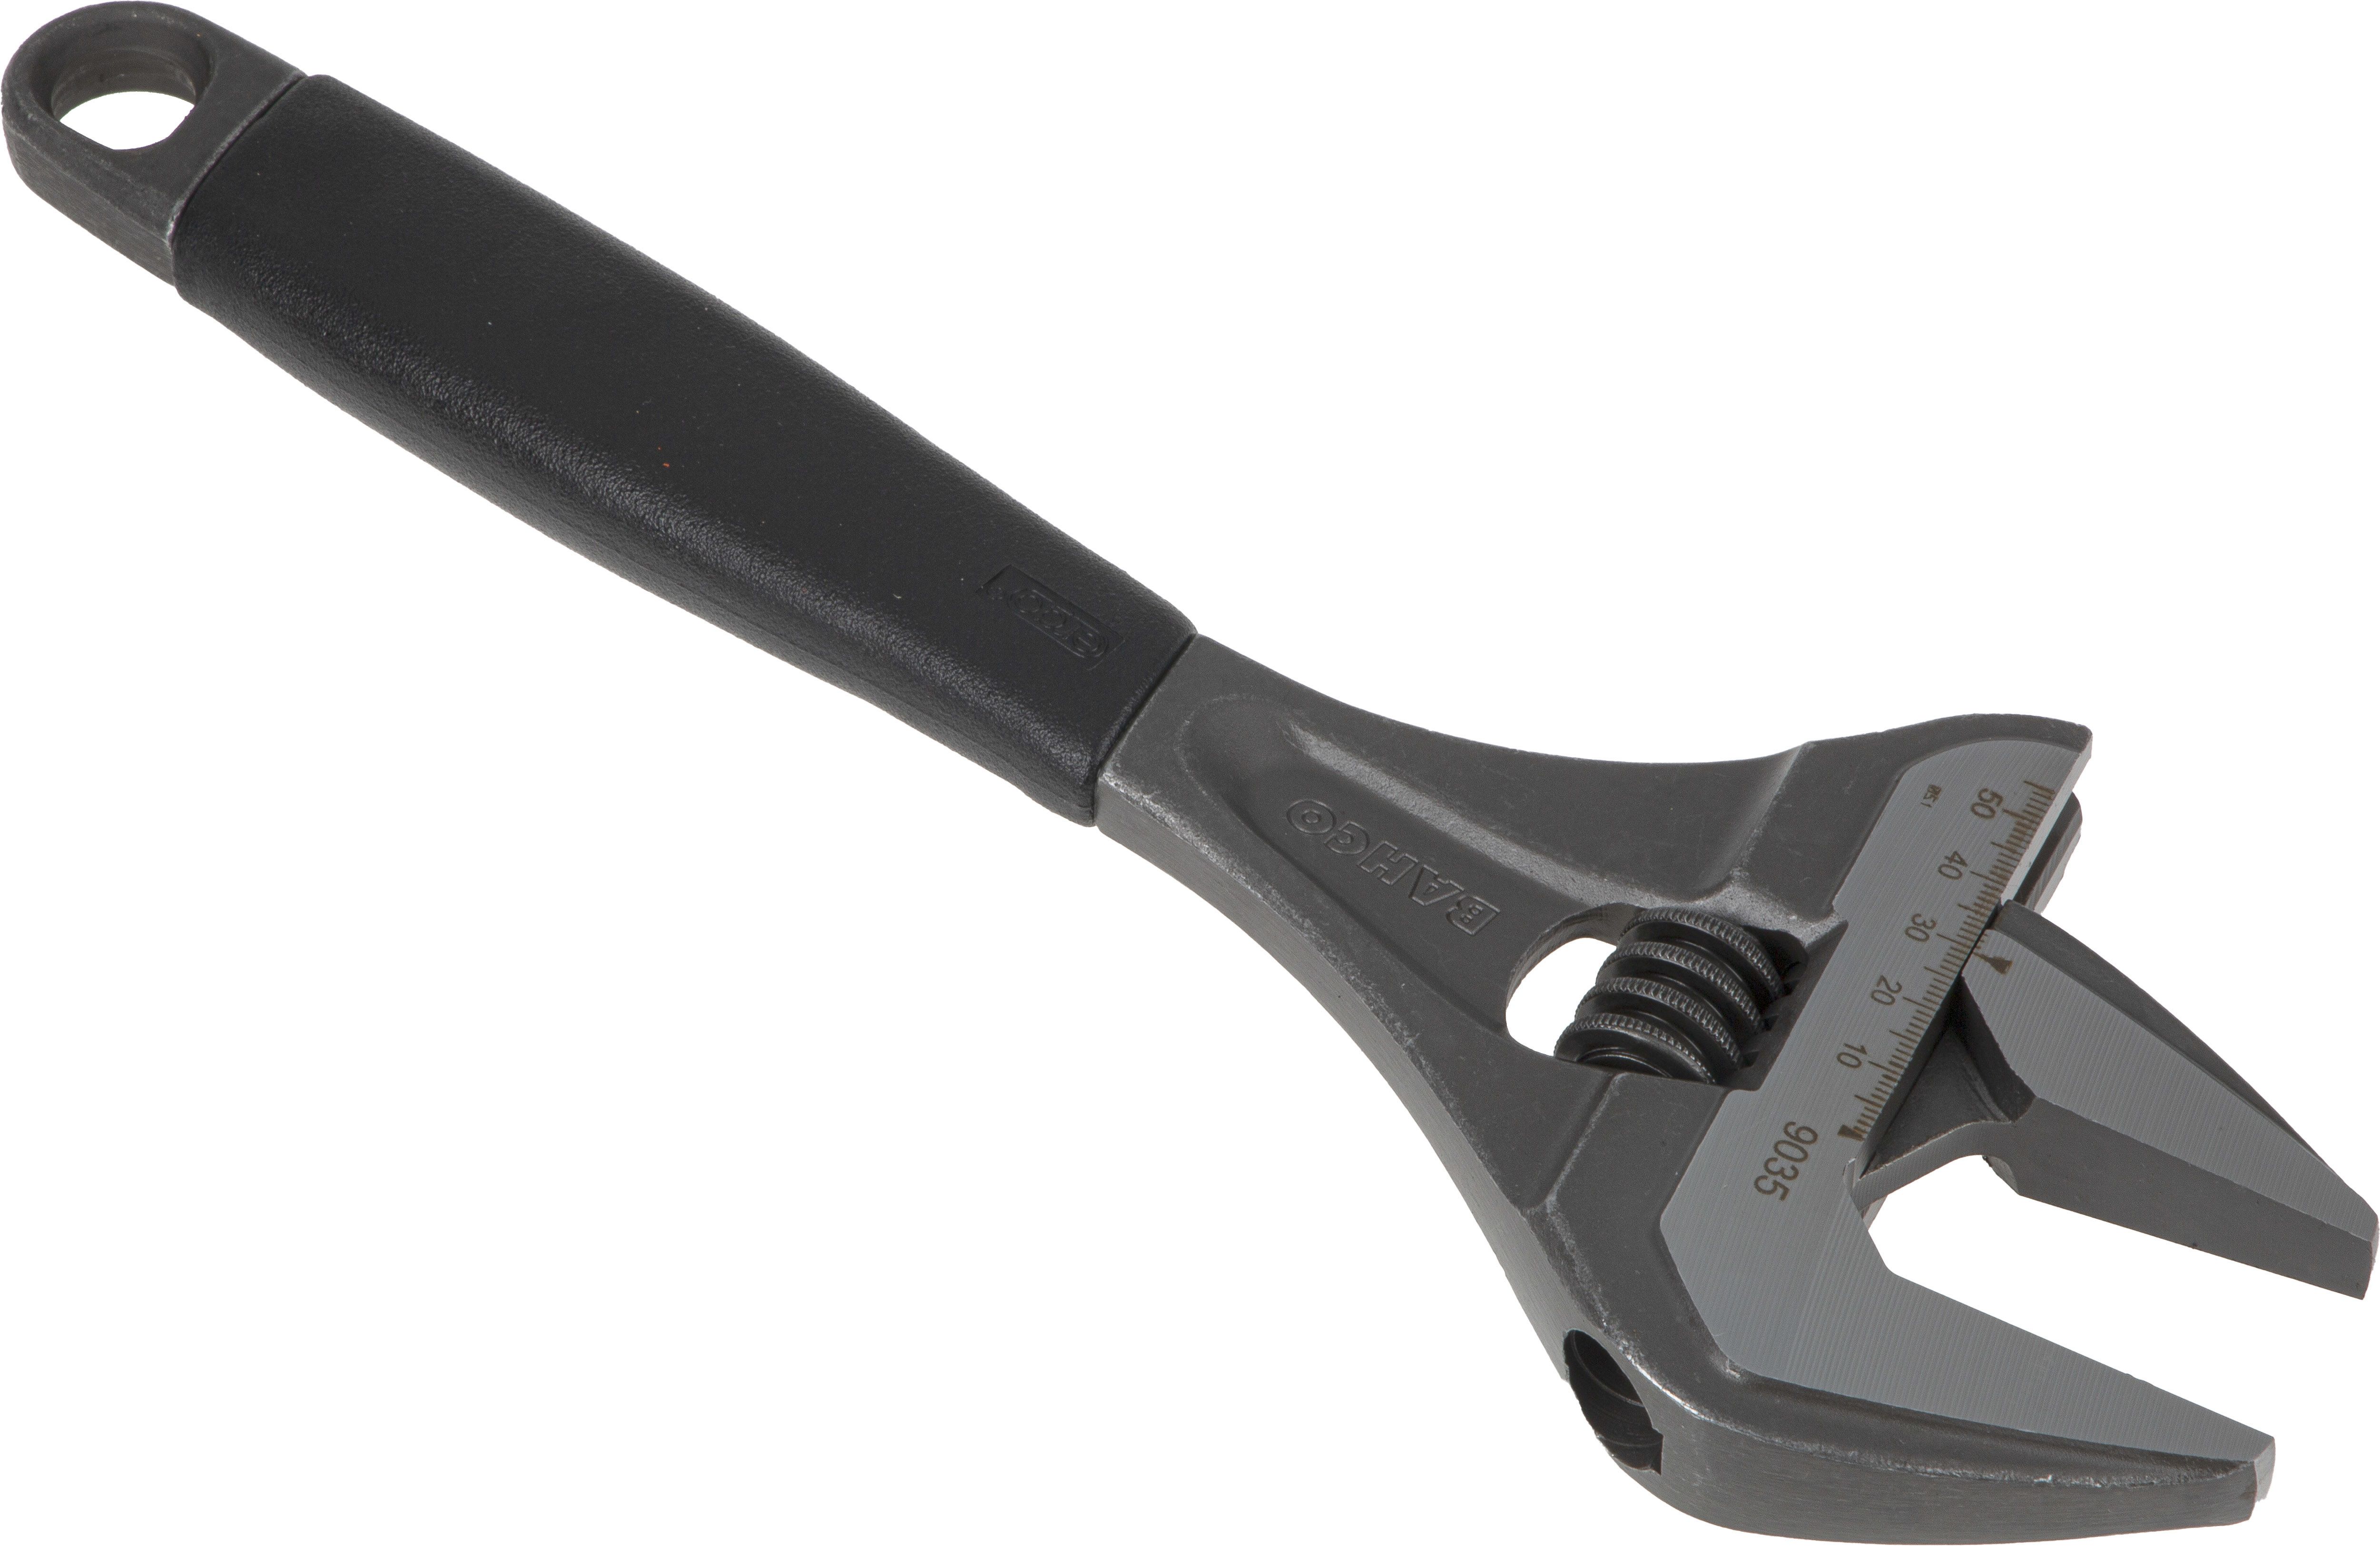 Bahco Adjustable Spanner, 324 mm Overall Length, 55.6mm Max Jaw Capacity